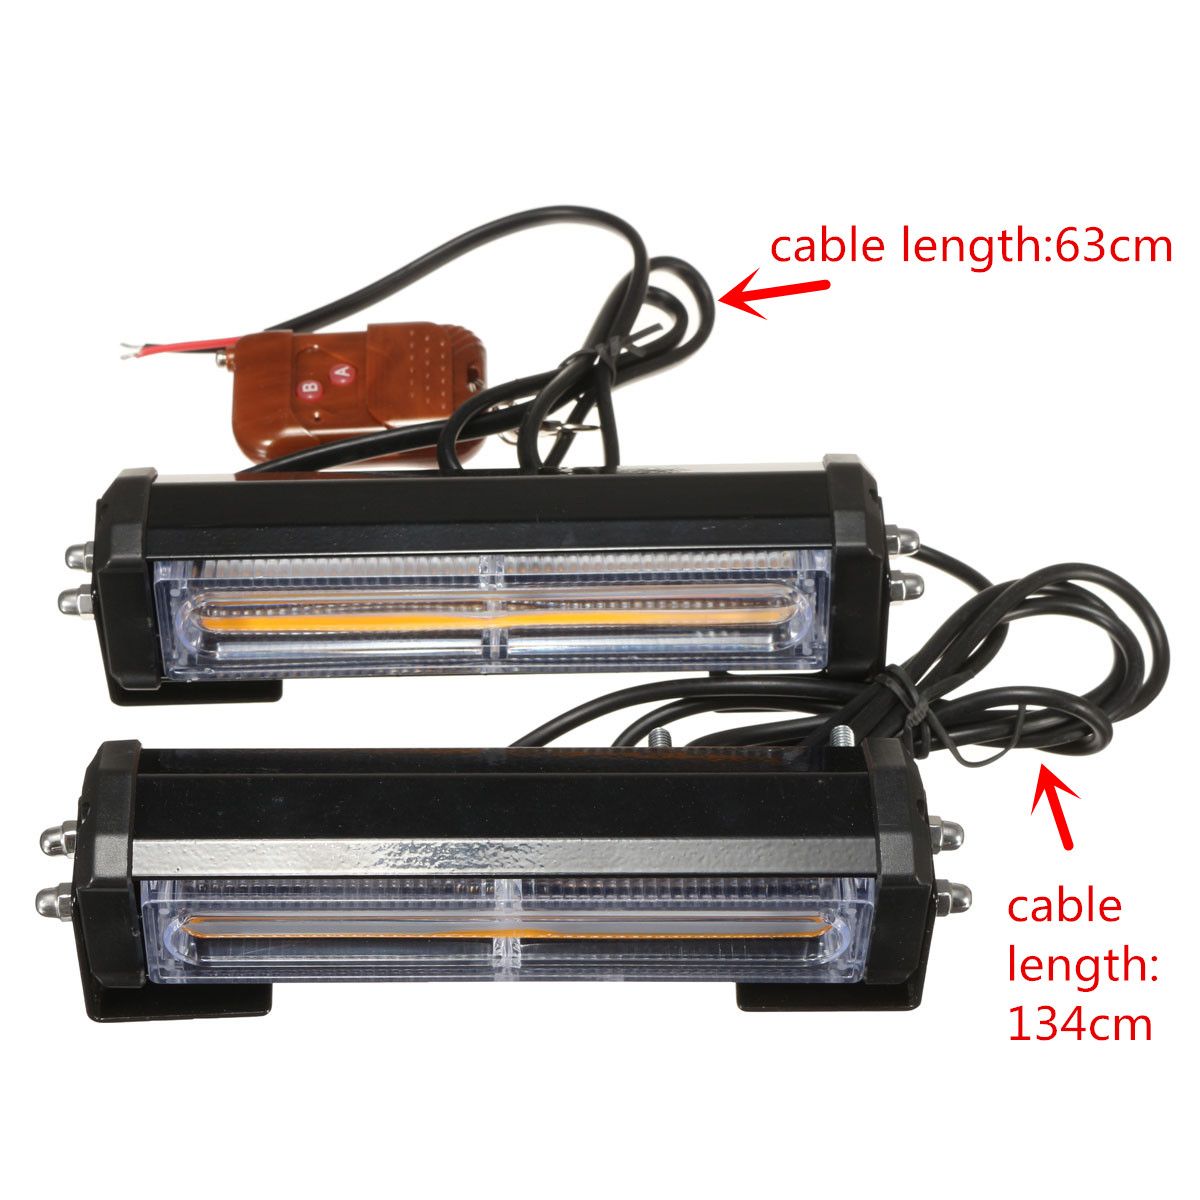 COB-LED-Car-Front-Grille-Flashing-Lights-Emergency-Warning-Strobe-Lamp-Bars-Amber-with-Remote-1421457